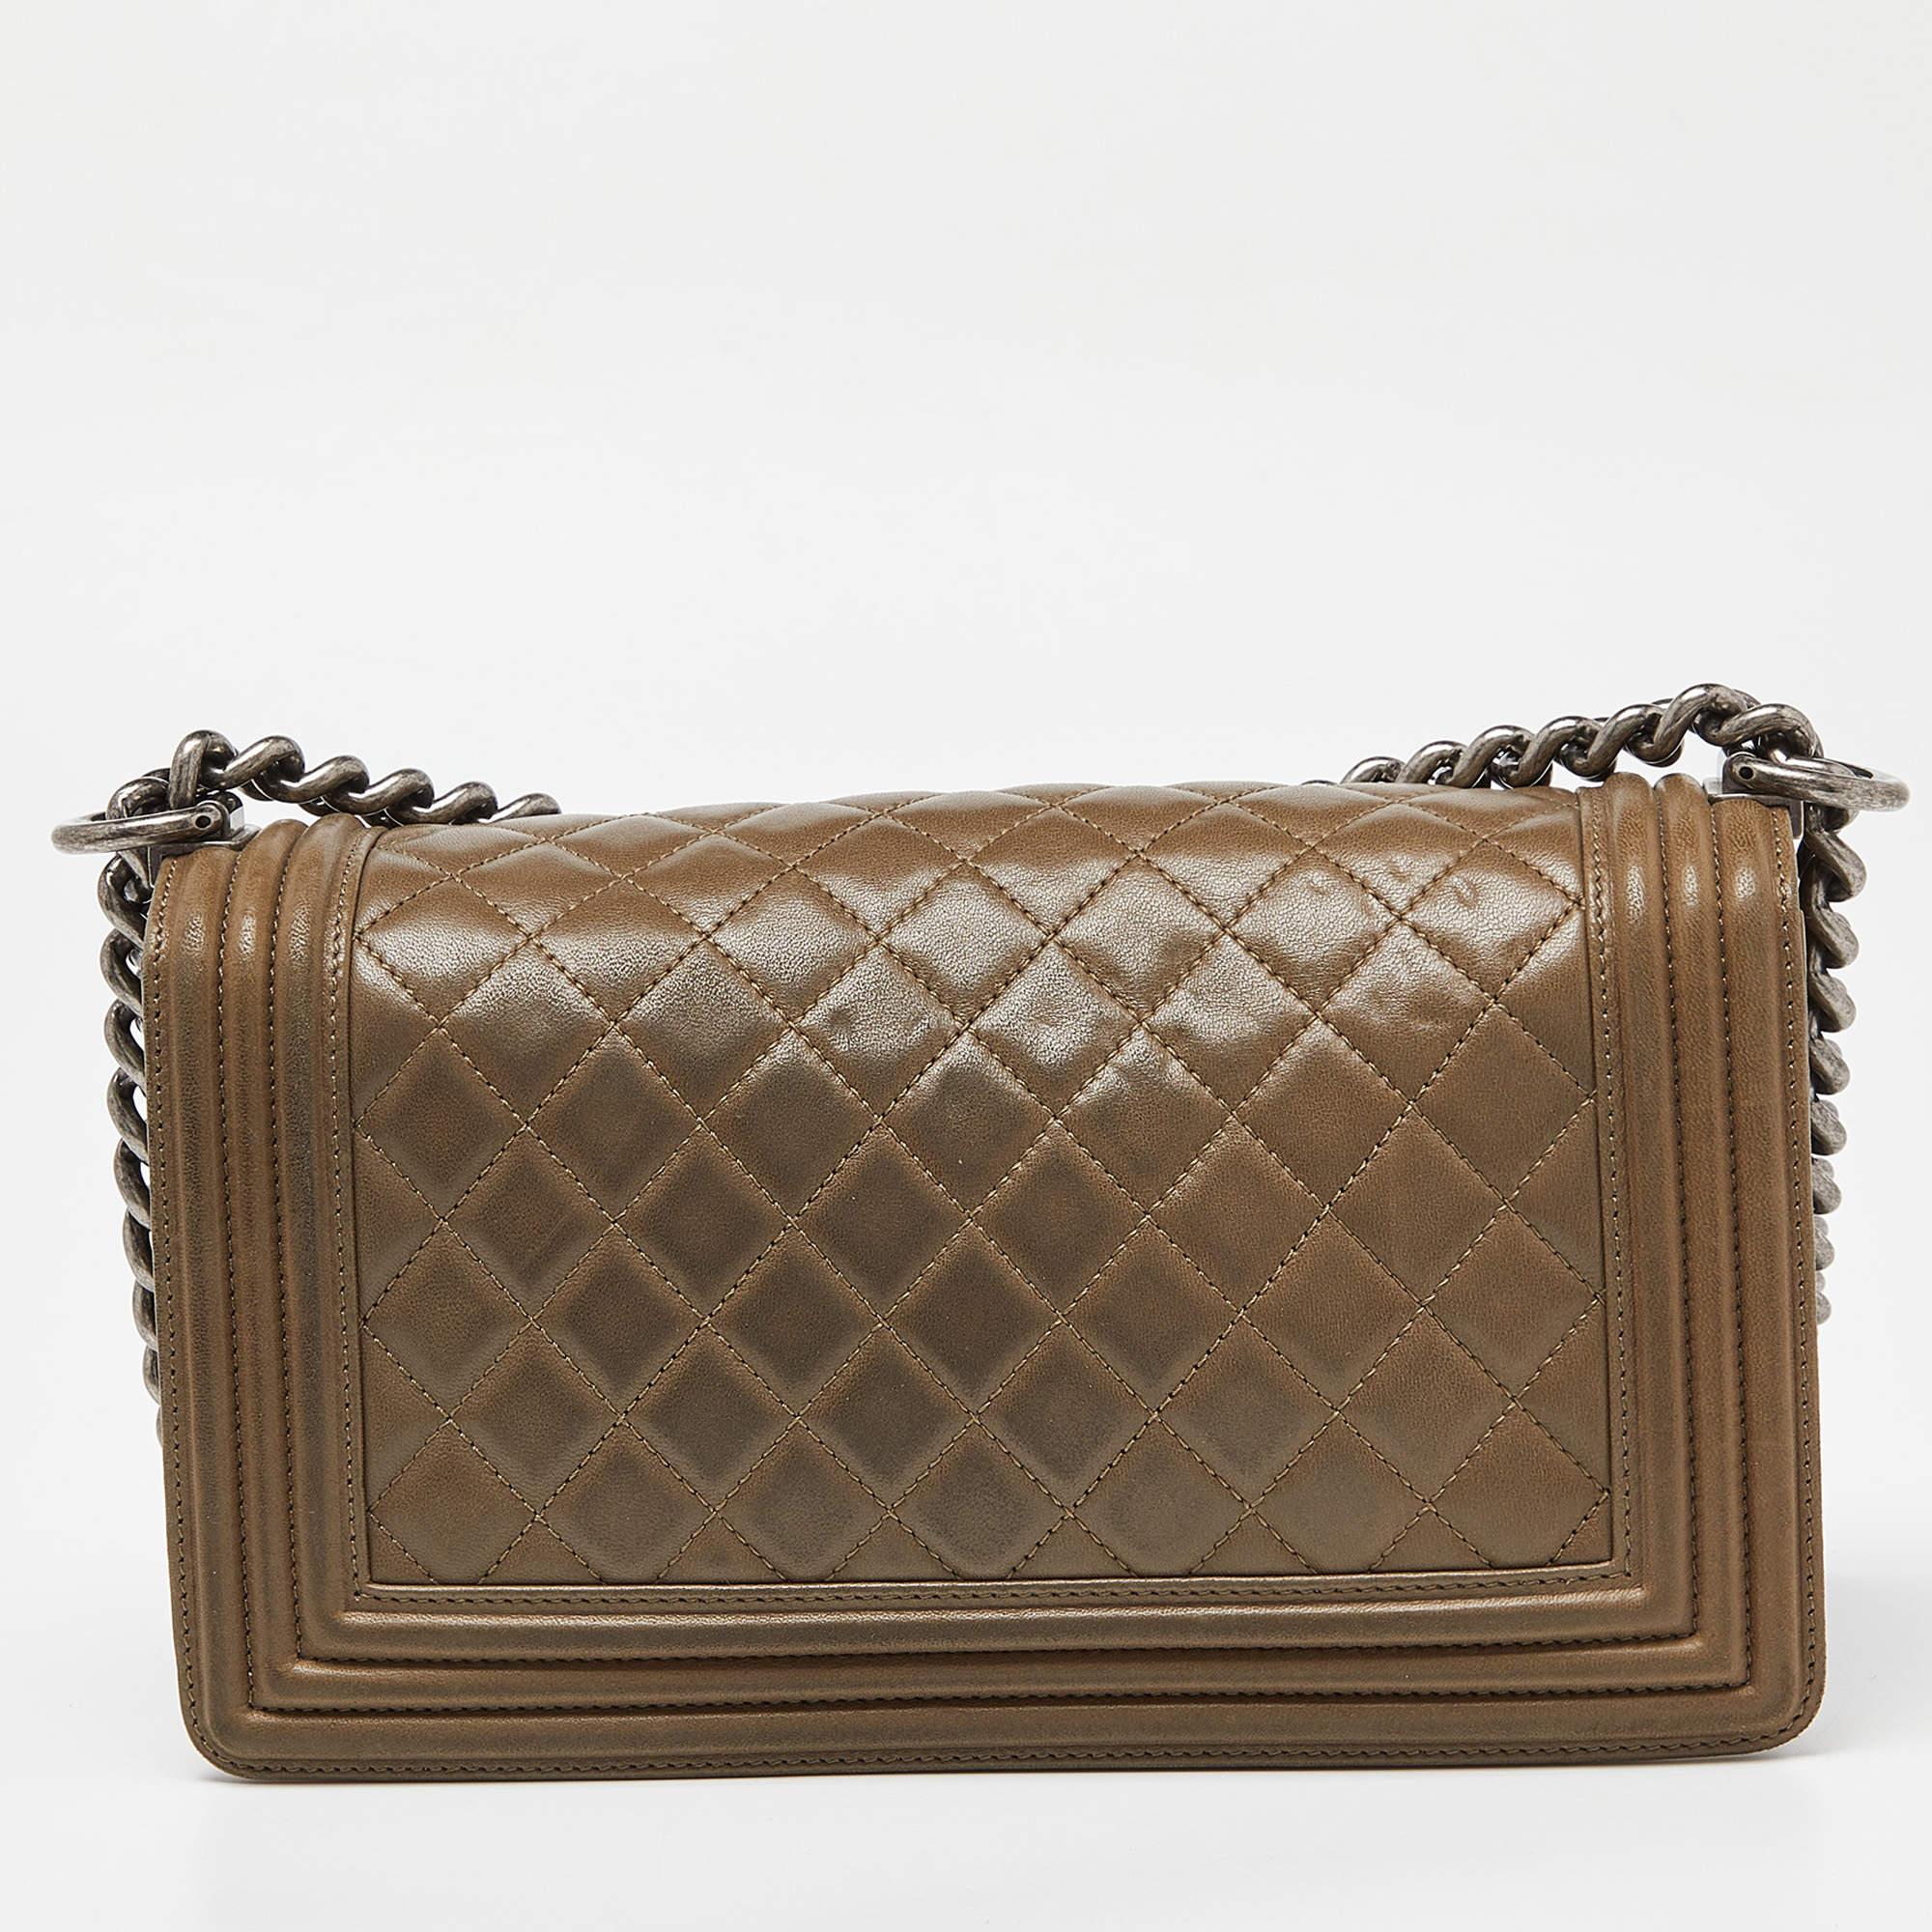 Chanel Green Quilted Leather Medium Boy Flap Bag 9